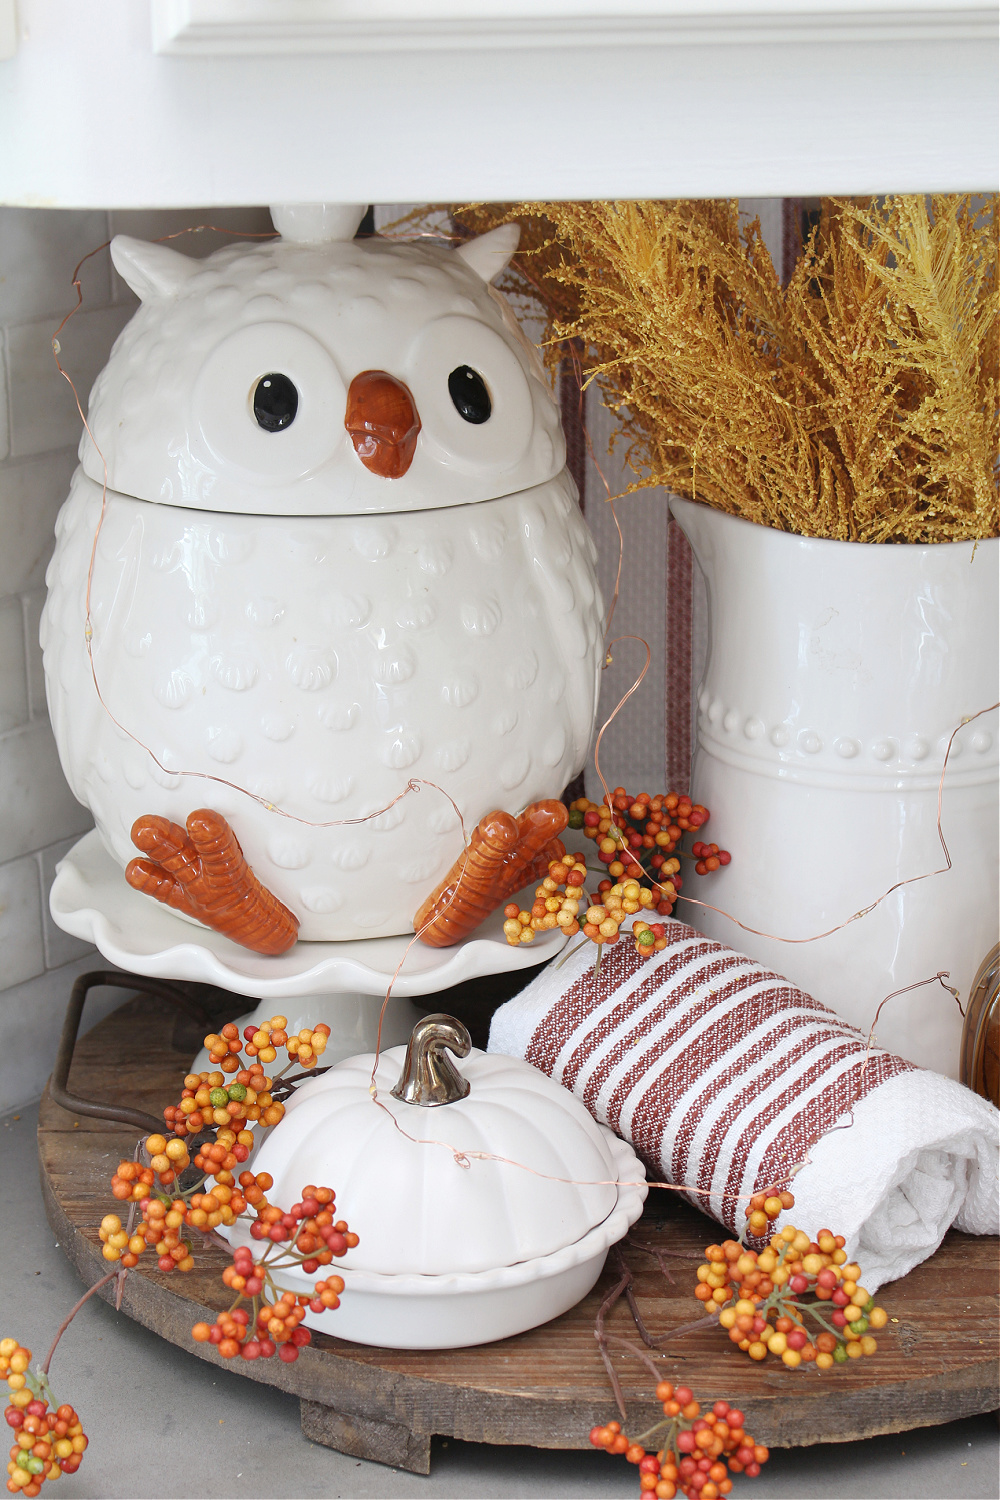 Cute fall kitchen vignette with owl cookie jar.